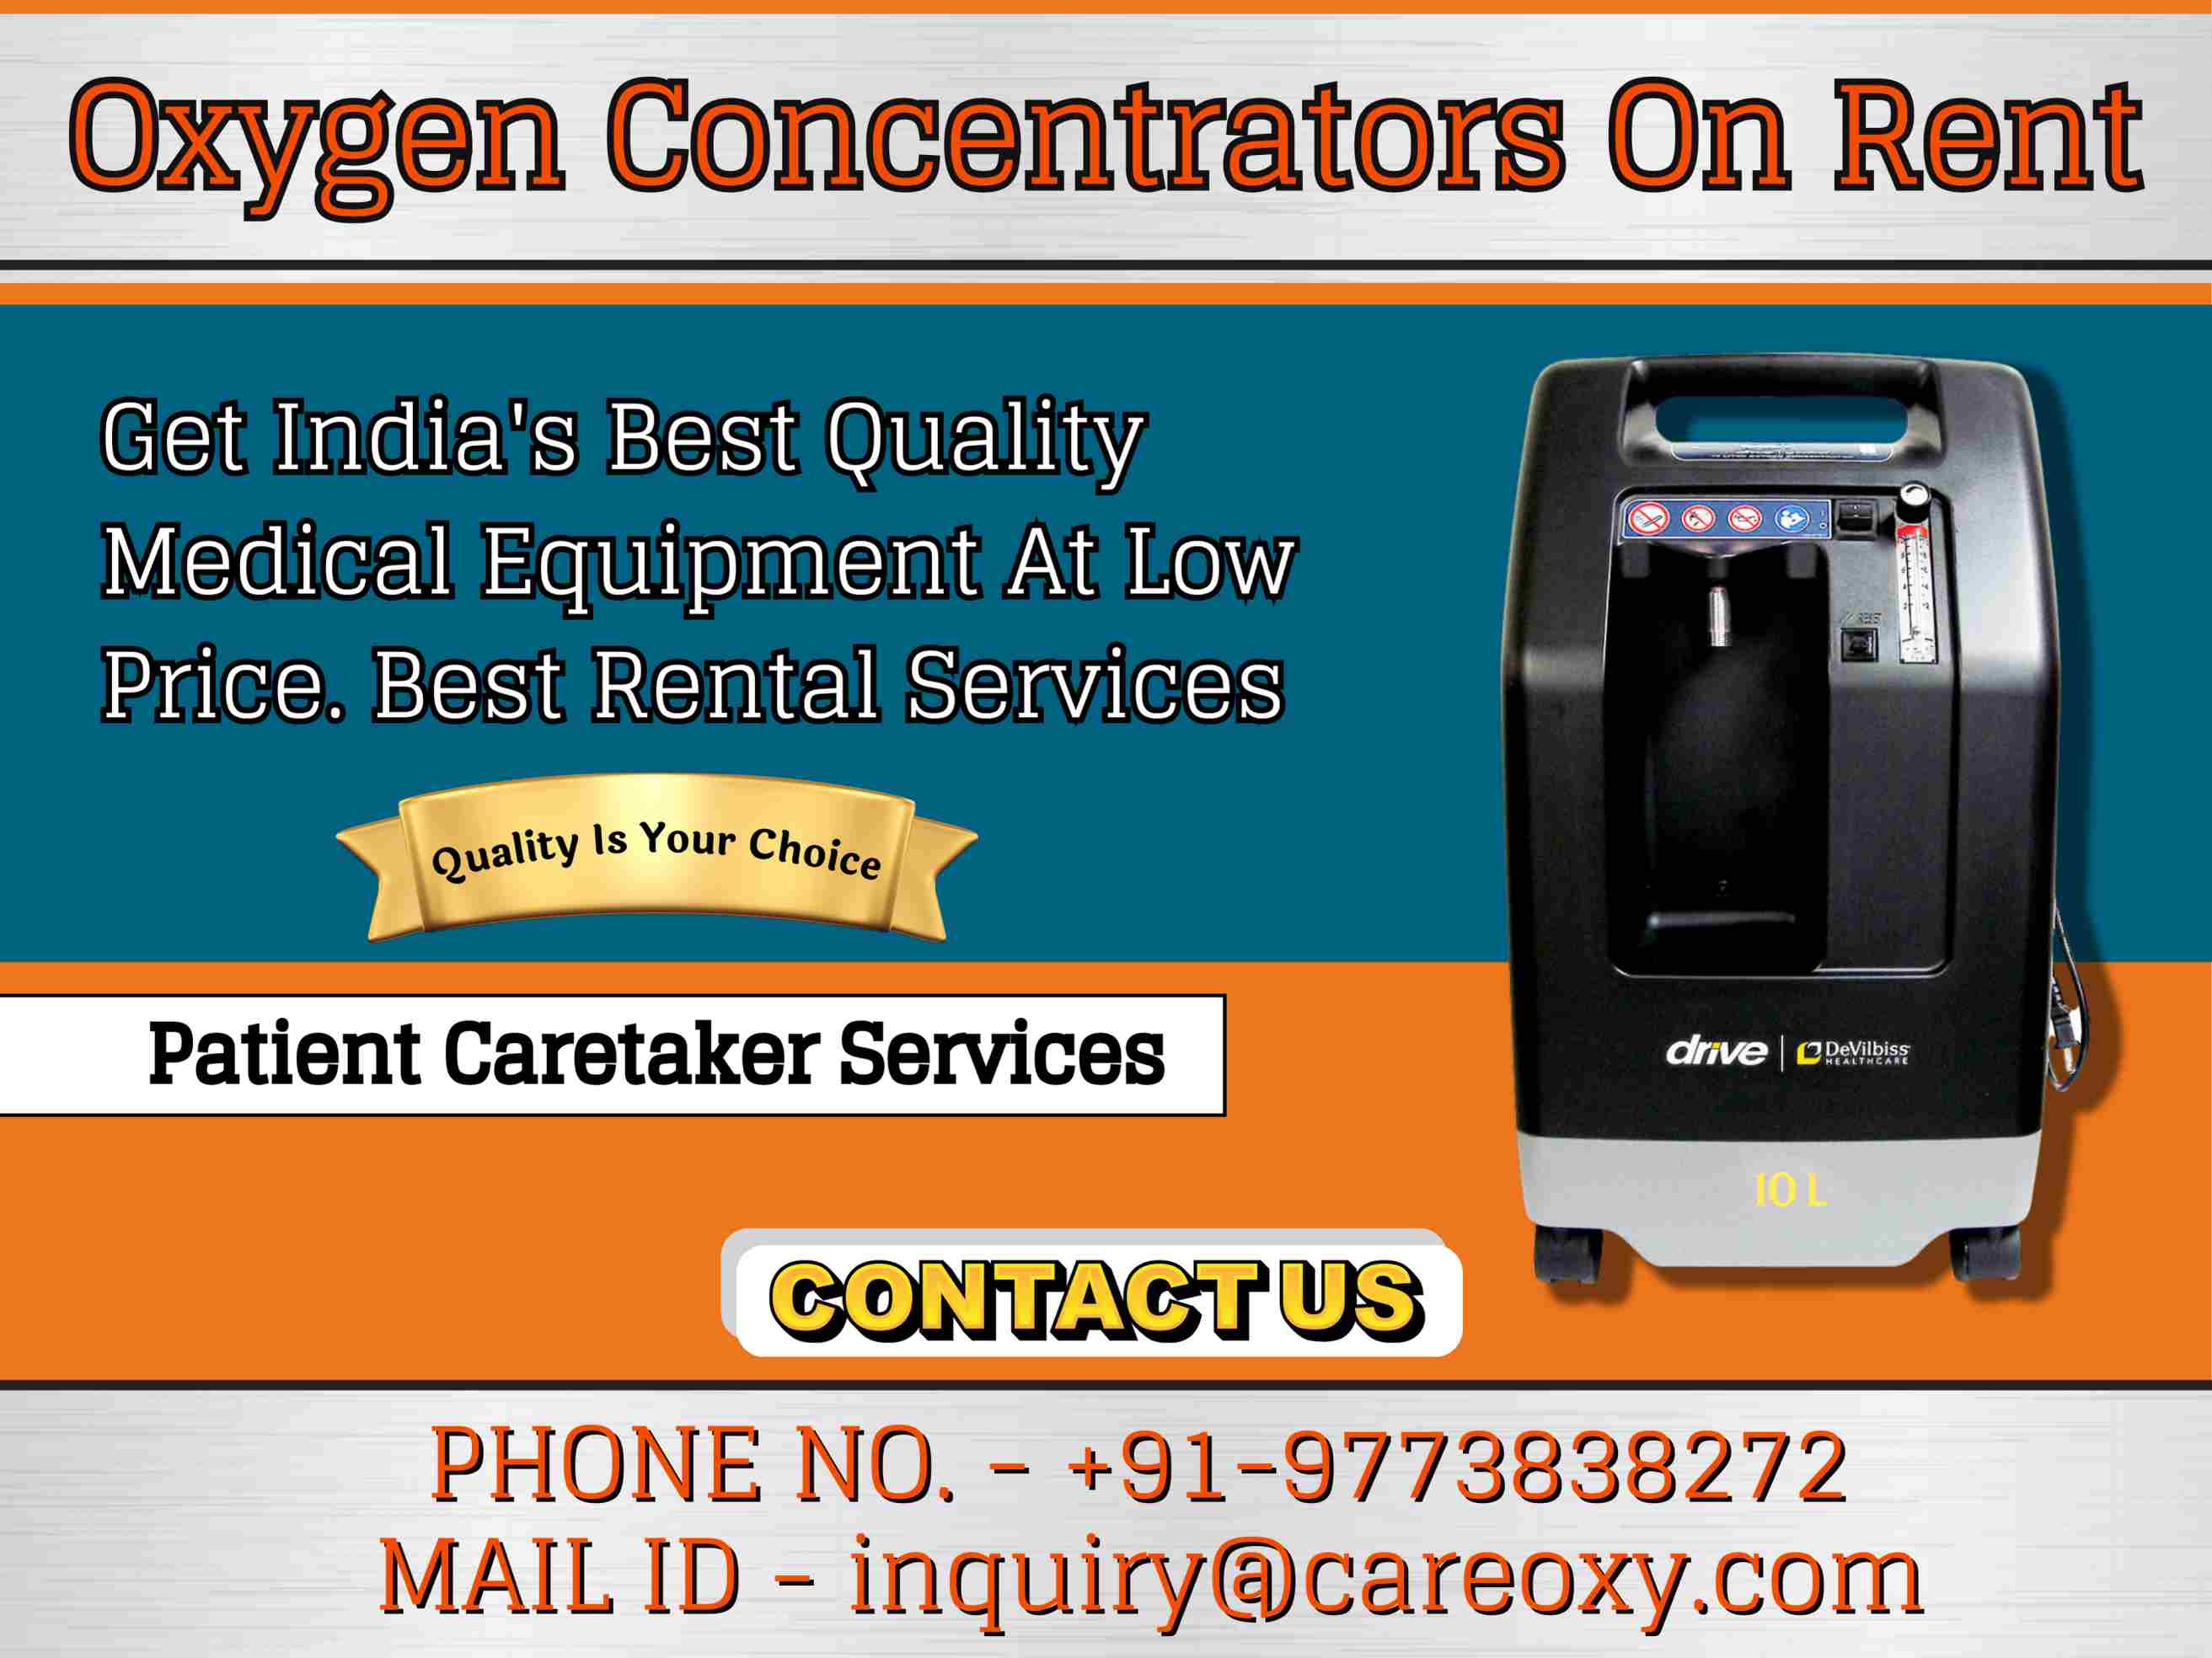 Do You Want Quality Oxygen Concentrators On Rent in Delhi? | Breathe Easy with Care Oxy Company